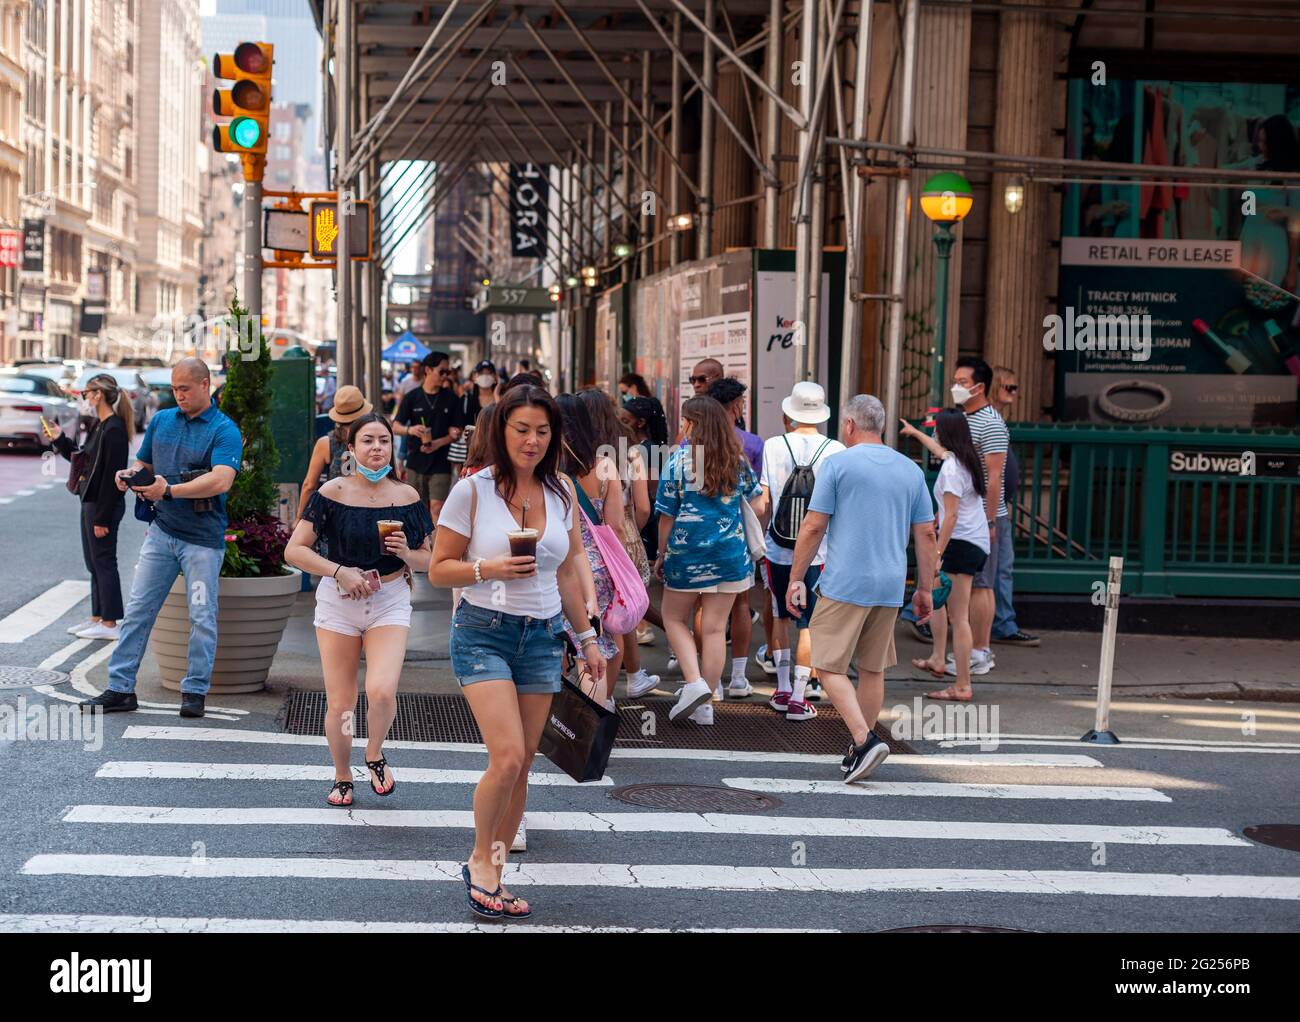 Shoppers in the Soho neighborhood in New York on Sunday, June 6, 2021. New York has relaxed mask mandates allowing most outdoor activities to be mask free as well as many indoor settings, with caveats. (© Richard B. Levine) Stock Photo